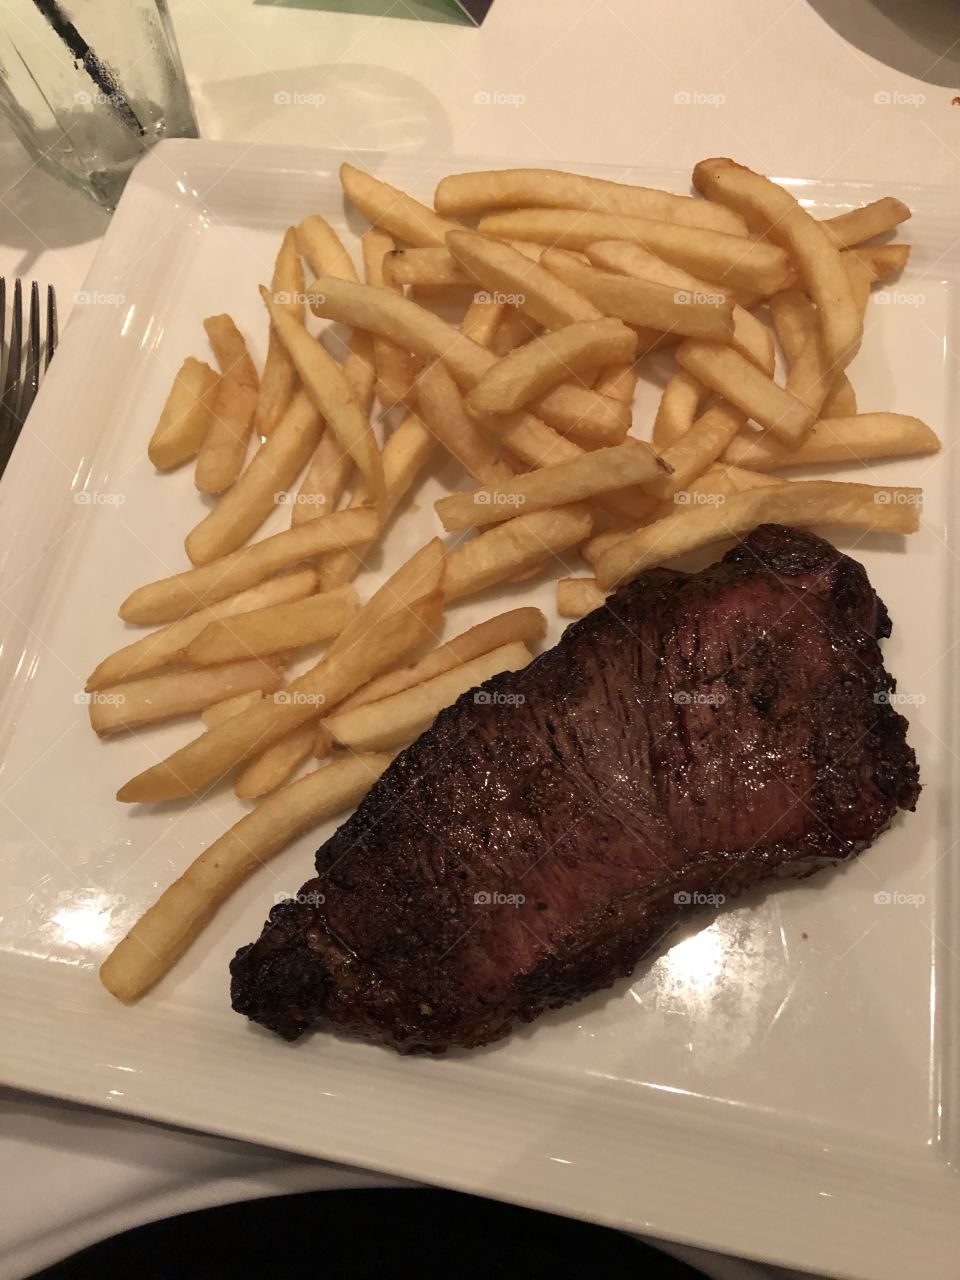 Steak and fries on a plate.